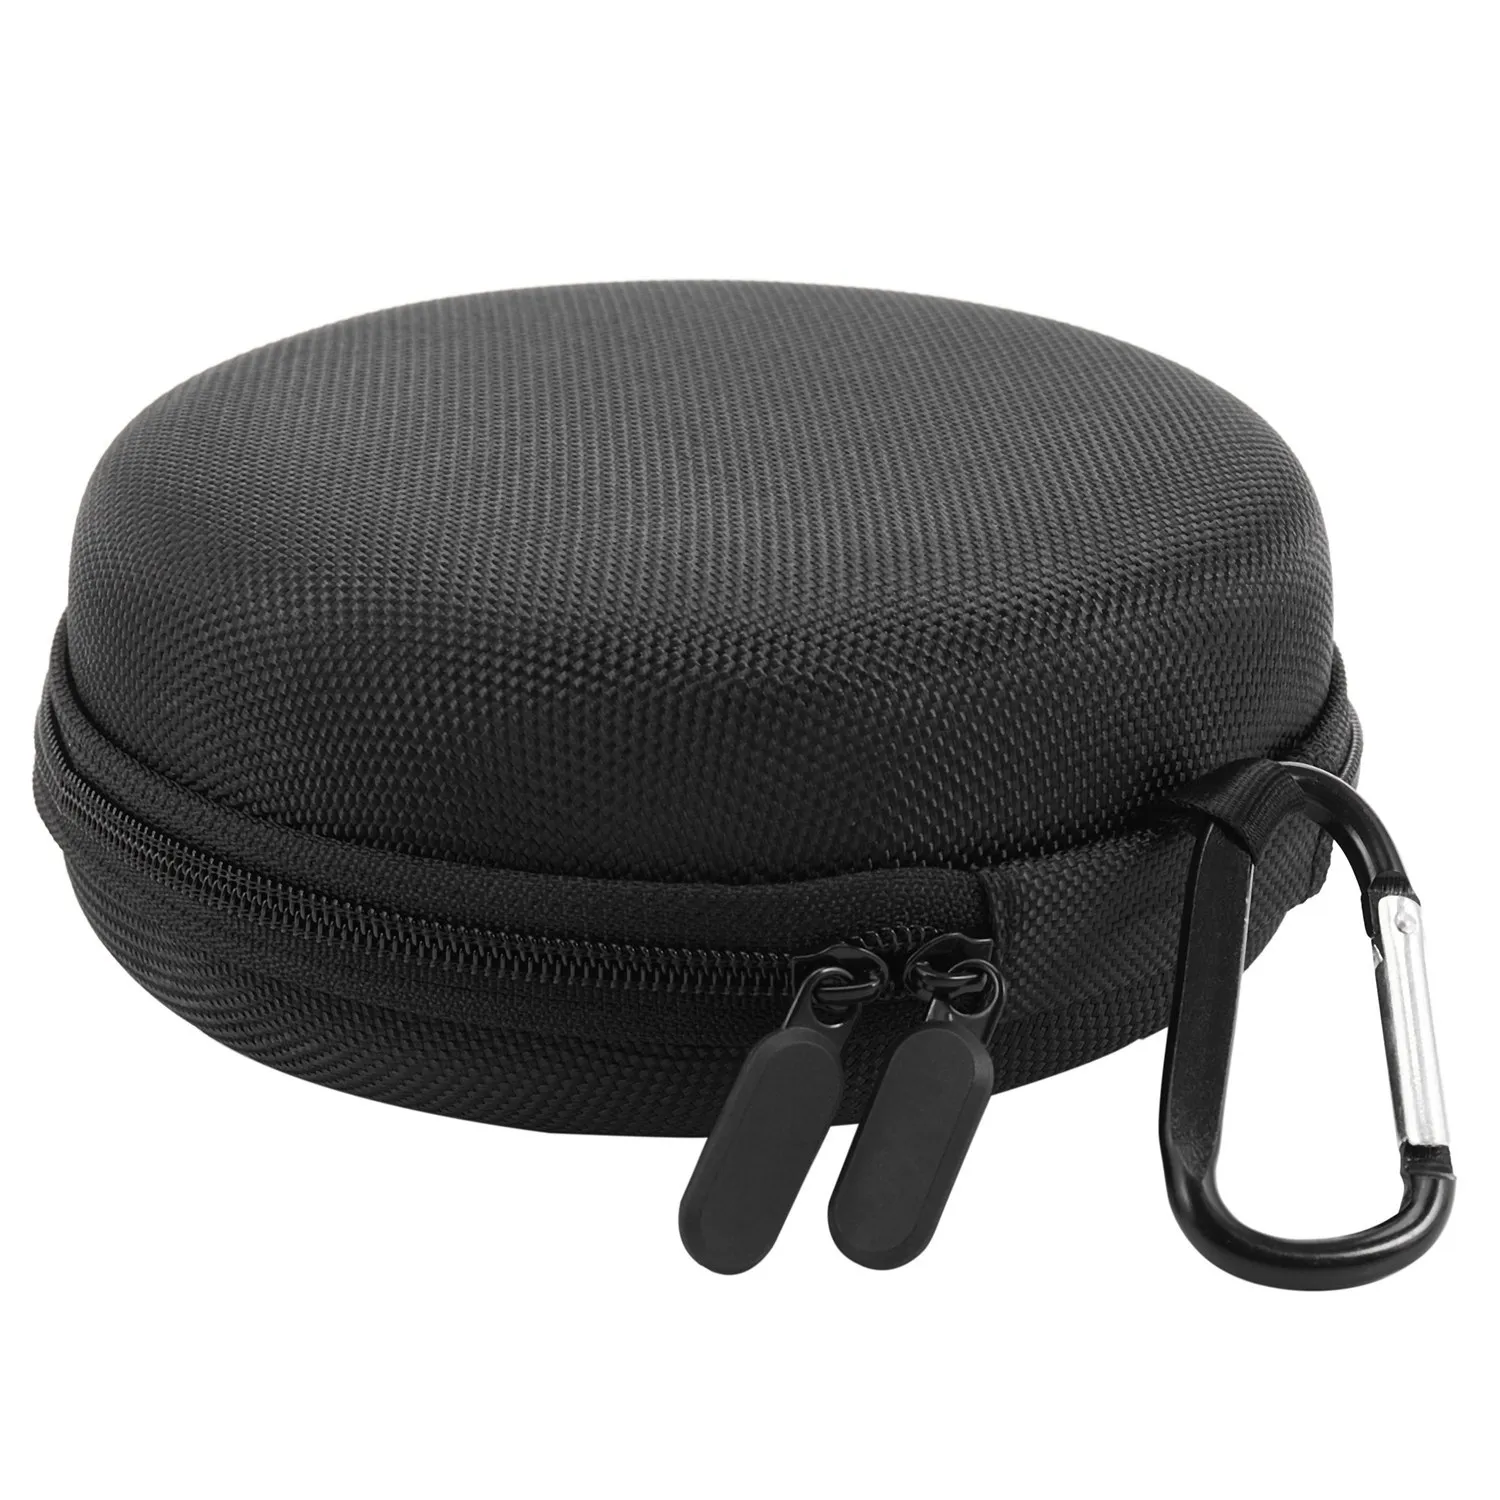 Bag Case Cover For B&o Beoplay A1 Speaker Travel Carrier Protect Cover Bluetooth Speaker Bag Case